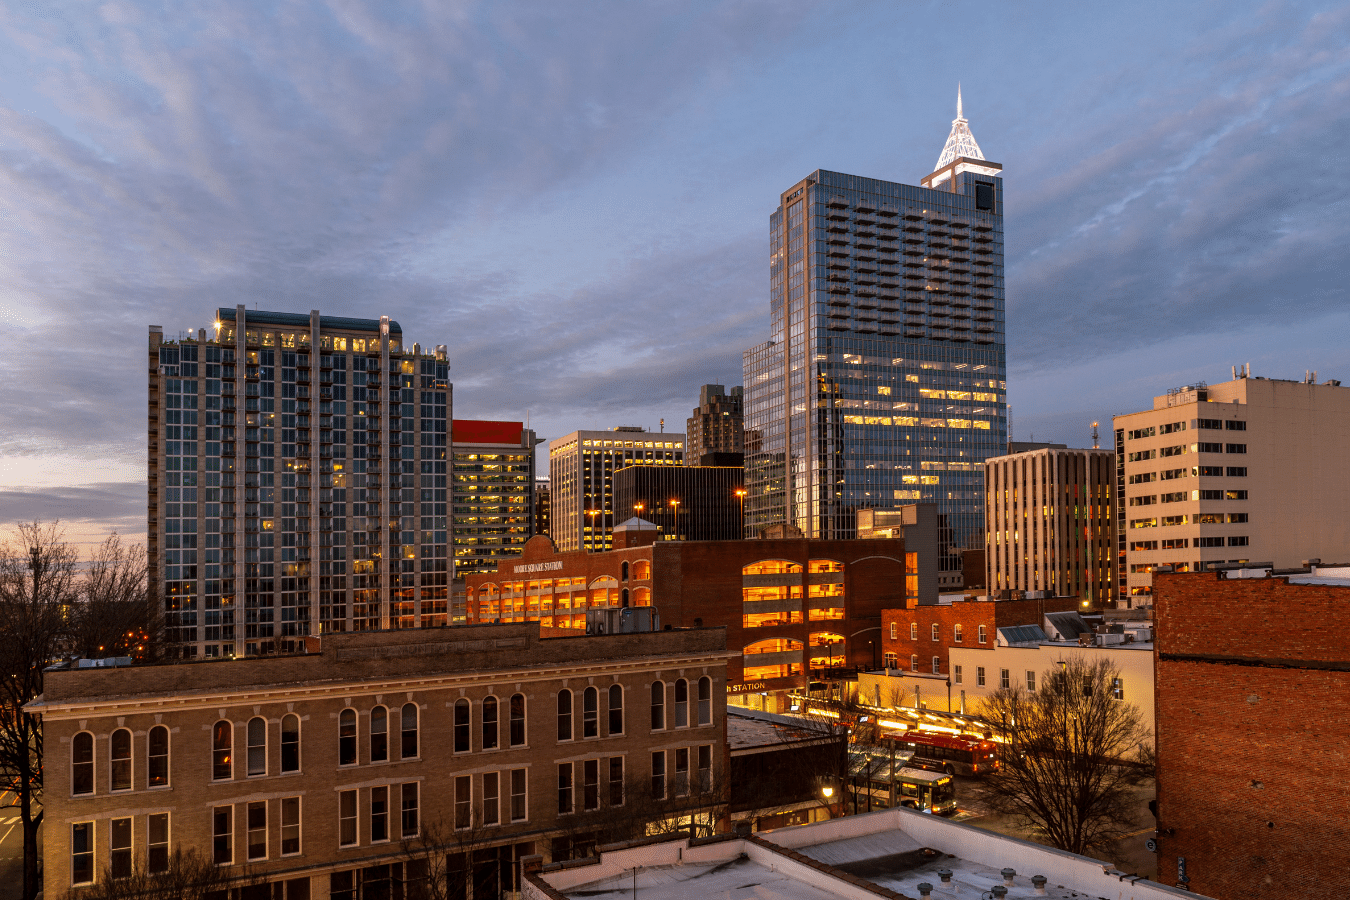 The city of Raleigh North Carolina at sunset with a unique perspective of the downtown skyline